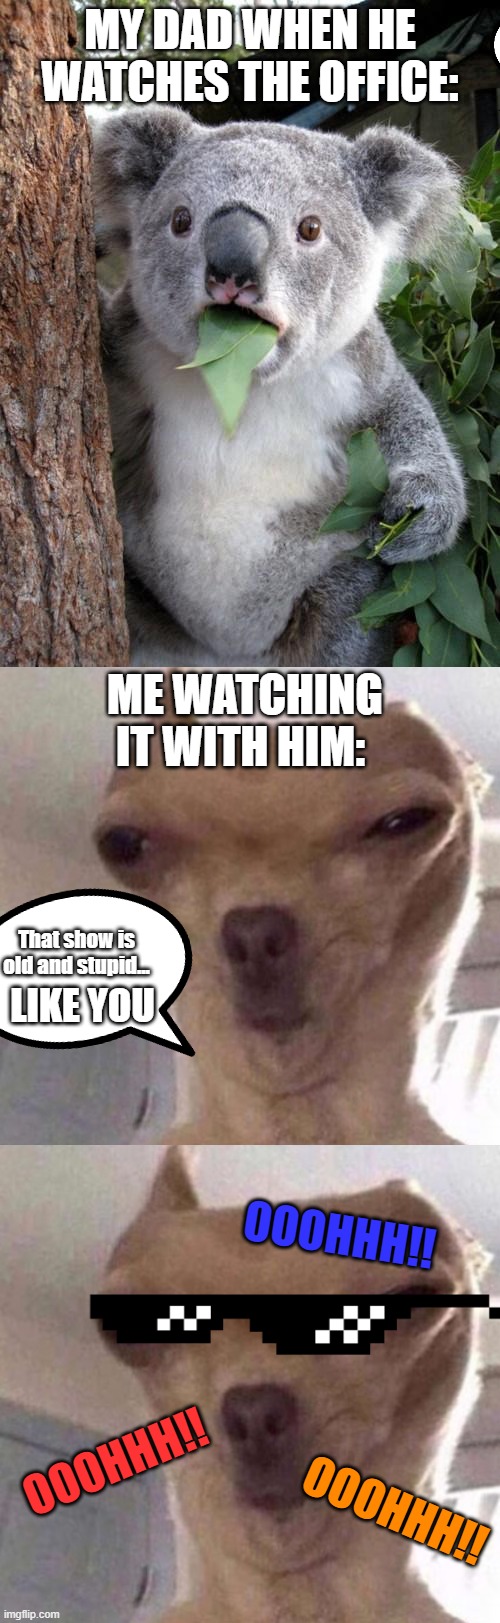 MY DAD WHEN HE WATCHES THE OFFICE:; ME WATCHING IT WITH HIM:; That show is old and stupid... LIKE YOU; OOOHHH!! OOOHHH!! OOOHHH!! | image tagged in memes,surprised koala | made w/ Imgflip meme maker